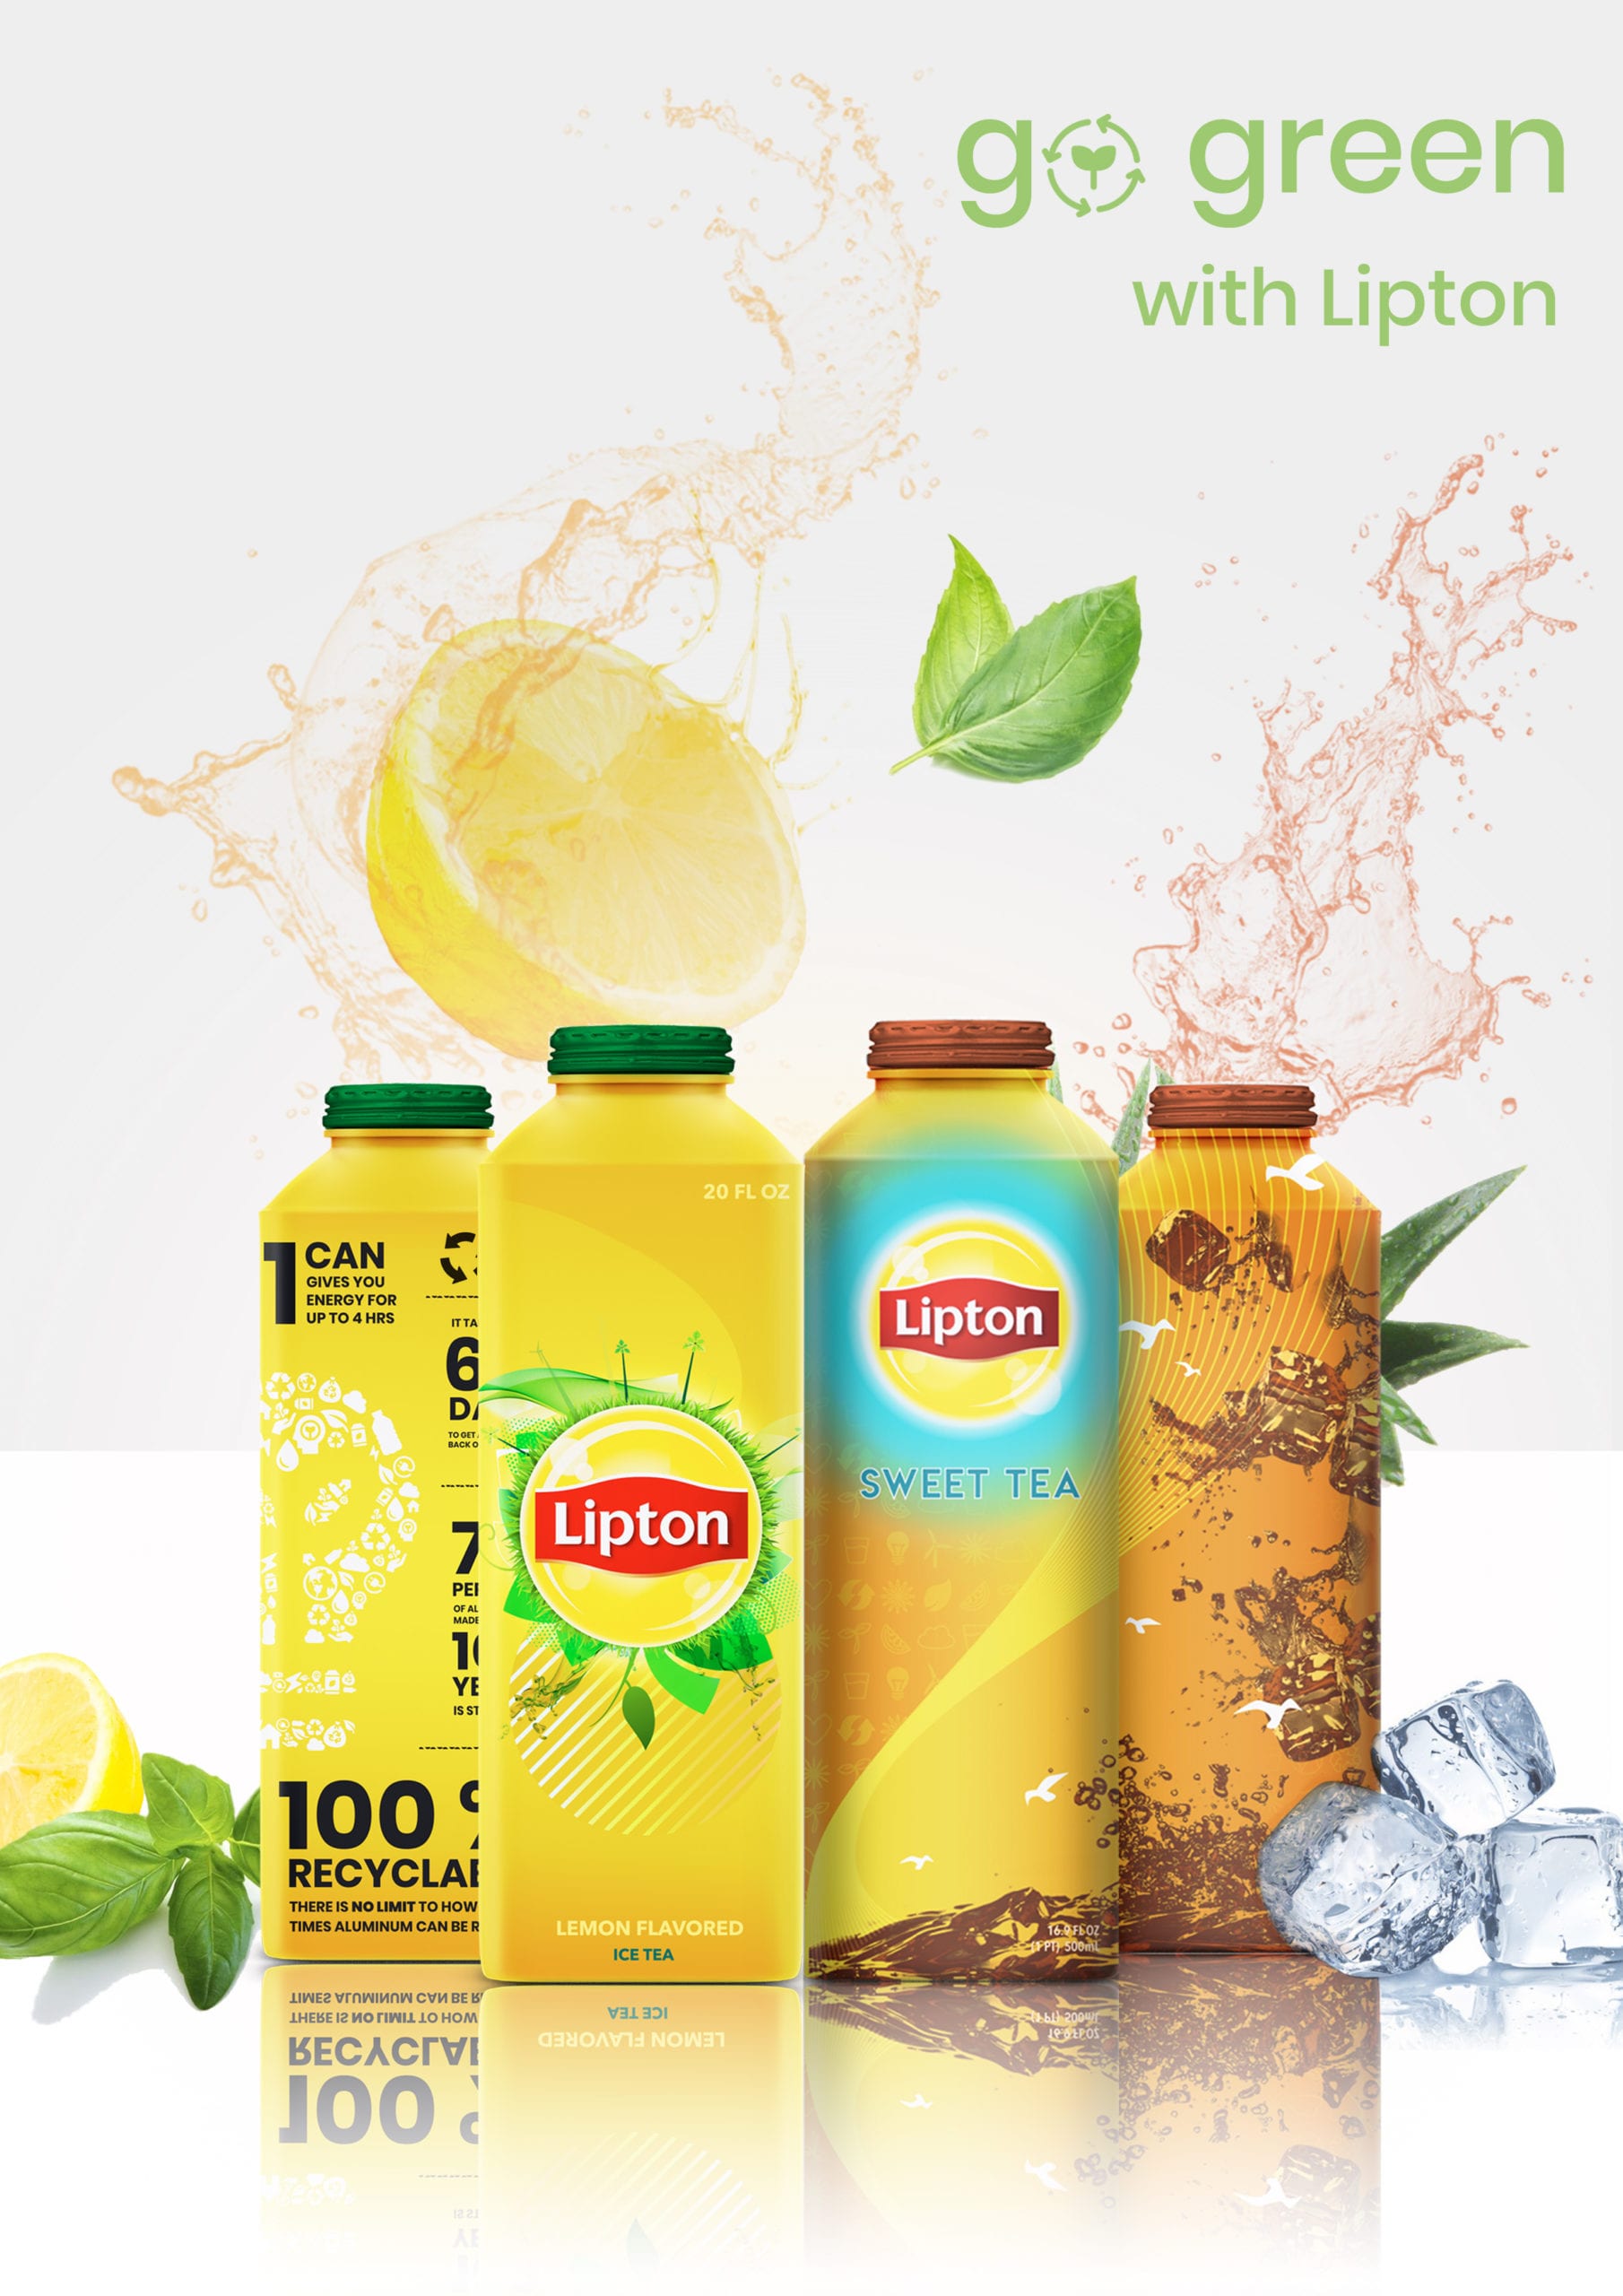 Lipton Iced Tea product packaging redesign creative marketing challenge